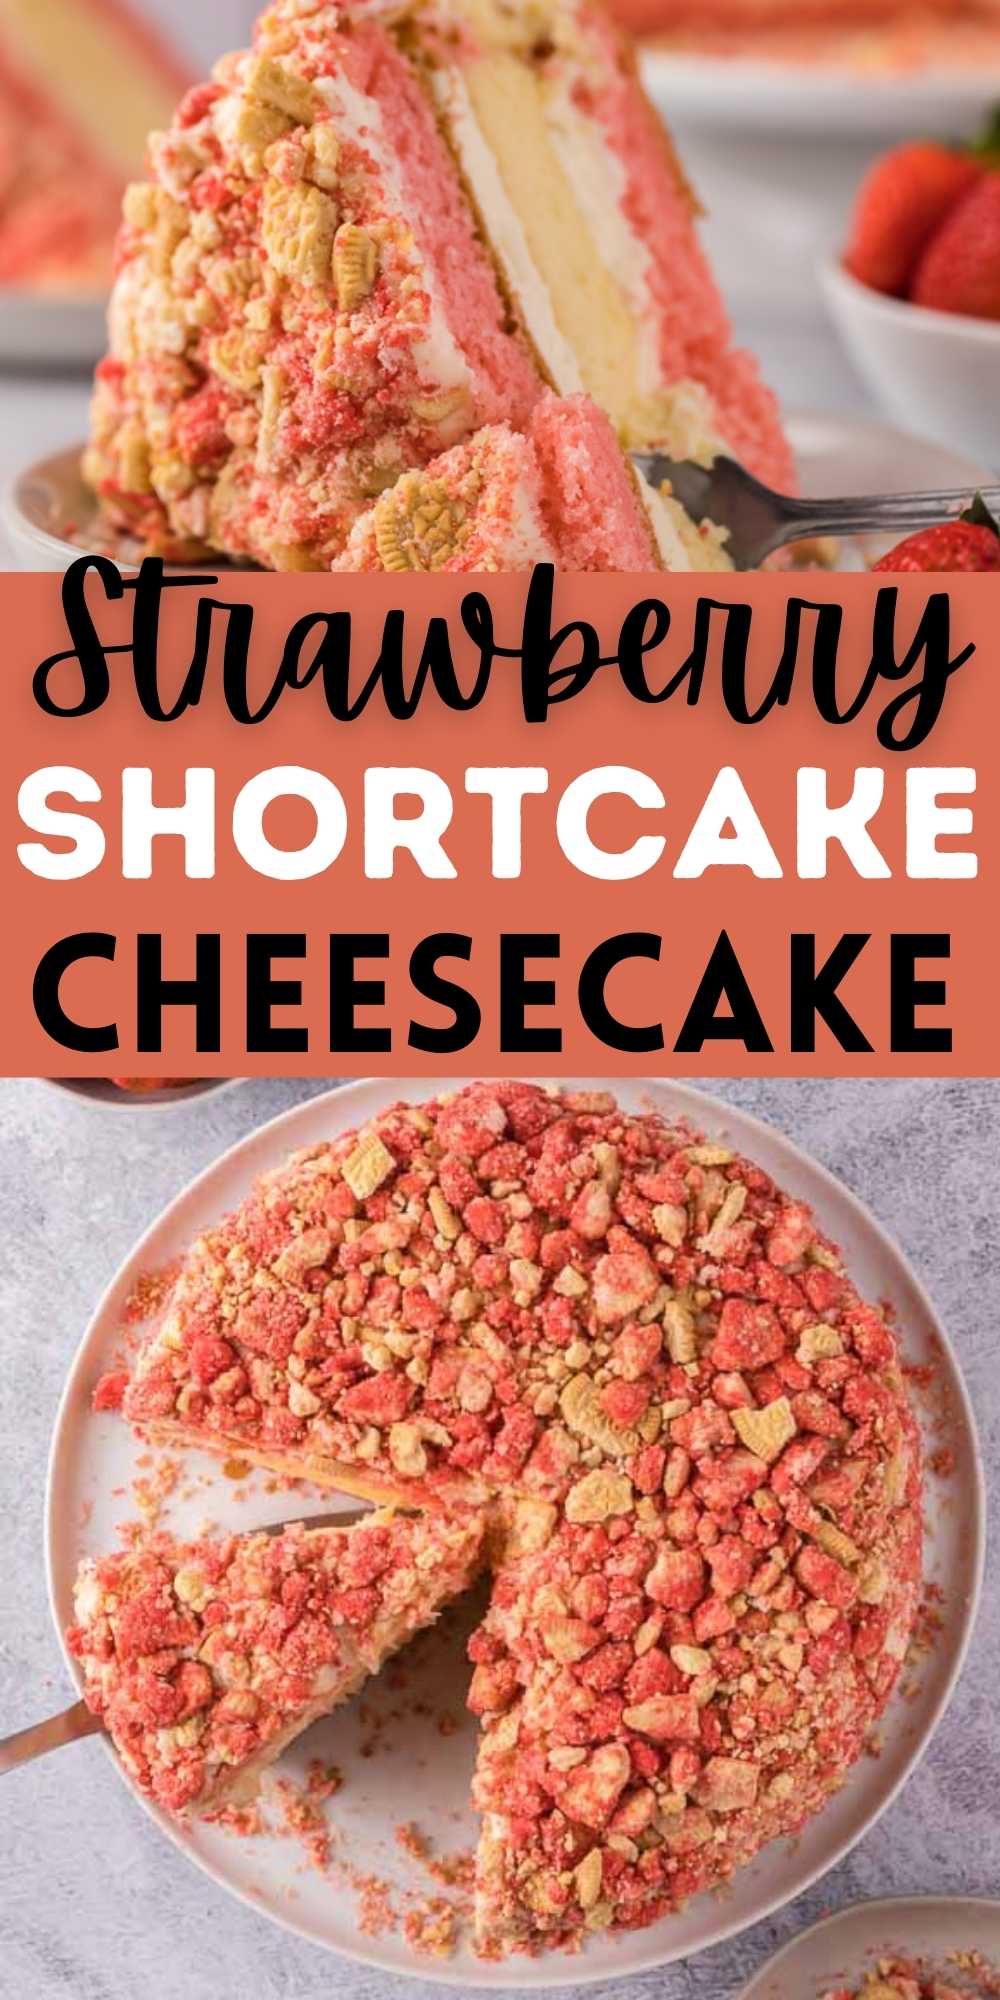 Strawberry Shortcake Cheesecake is topped with cream cheese icing and crumb topping. Each bite has layers of strawberry cake and cheesecake and is packed with tons of flavor. You are going to love this amazing and easy strawberry shortcake cheesecake recipe.  #dessertsonadime #cakerecipes #strawberryrecipes #cheesecakerecipes 
